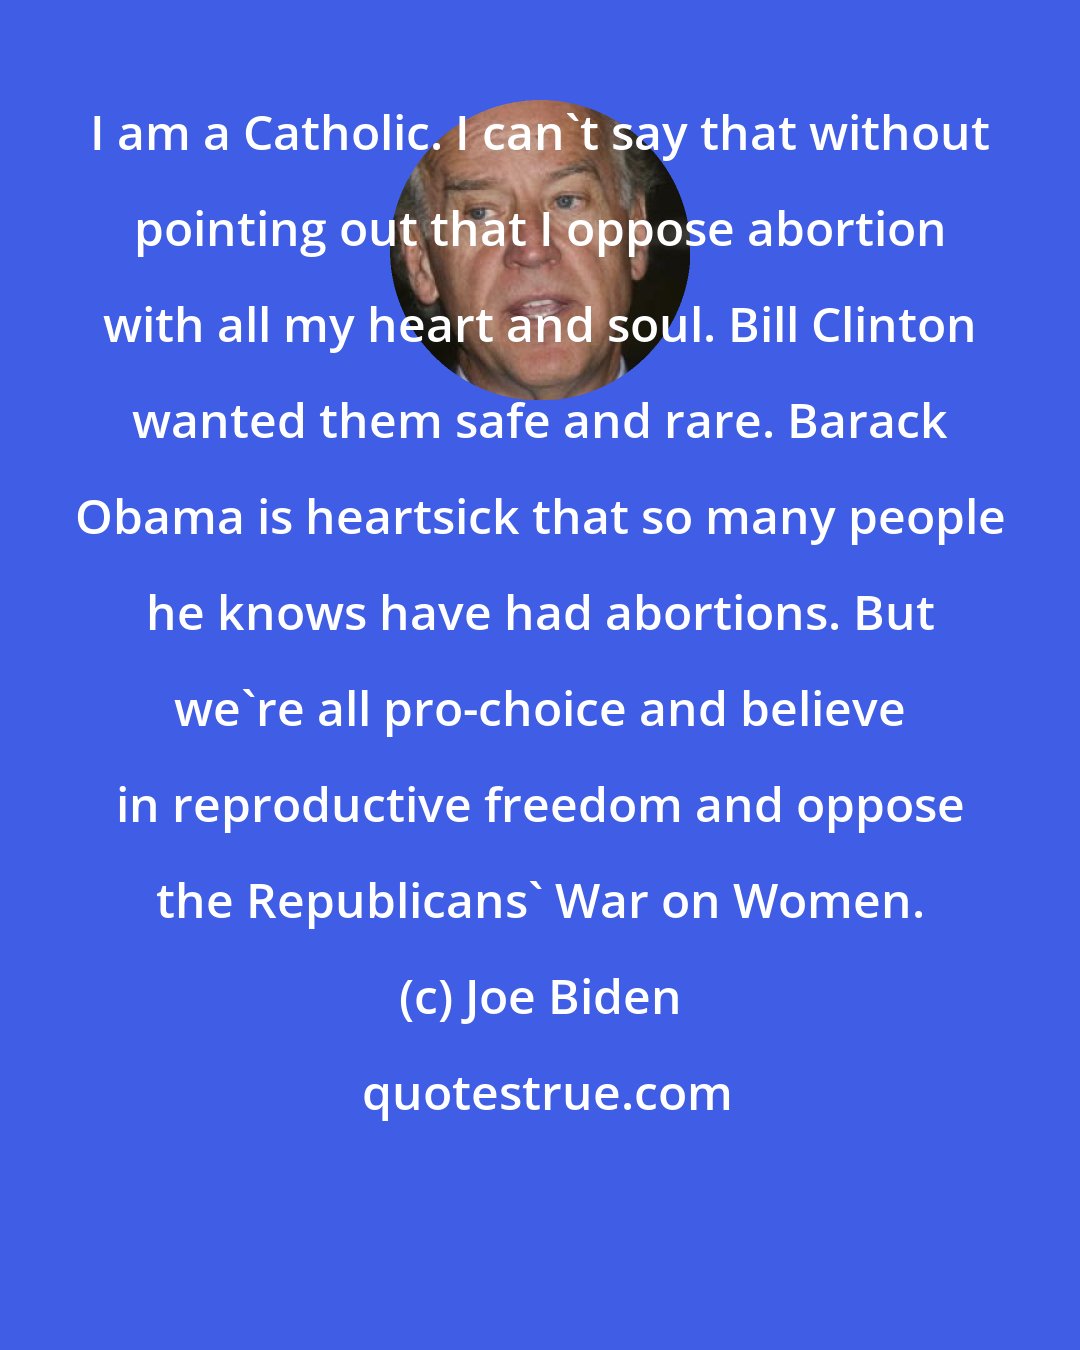 Joe Biden: I am a Catholic. I can't say that without pointing out that I oppose abortion with all my heart and soul. Bill Clinton wanted them safe and rare. Barack Obama is heartsick that so many people he knows have had abortions. But we're all pro-choice and believe in reproductive freedom and oppose the Republicans' War on Women.